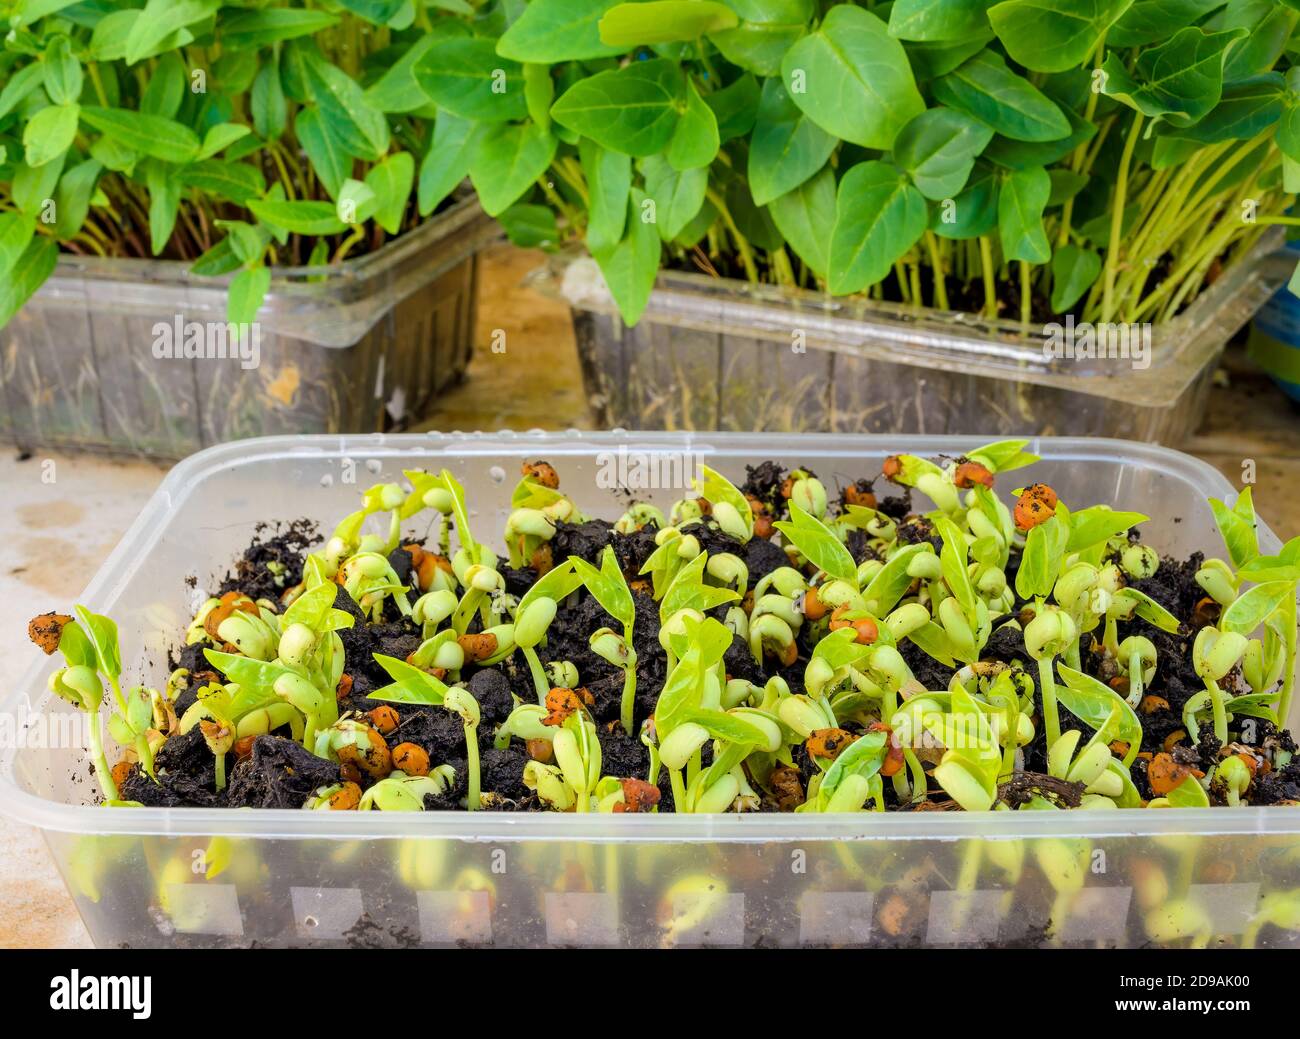 Homegrown Micro Geens from peas in a plastic container Stock Photo